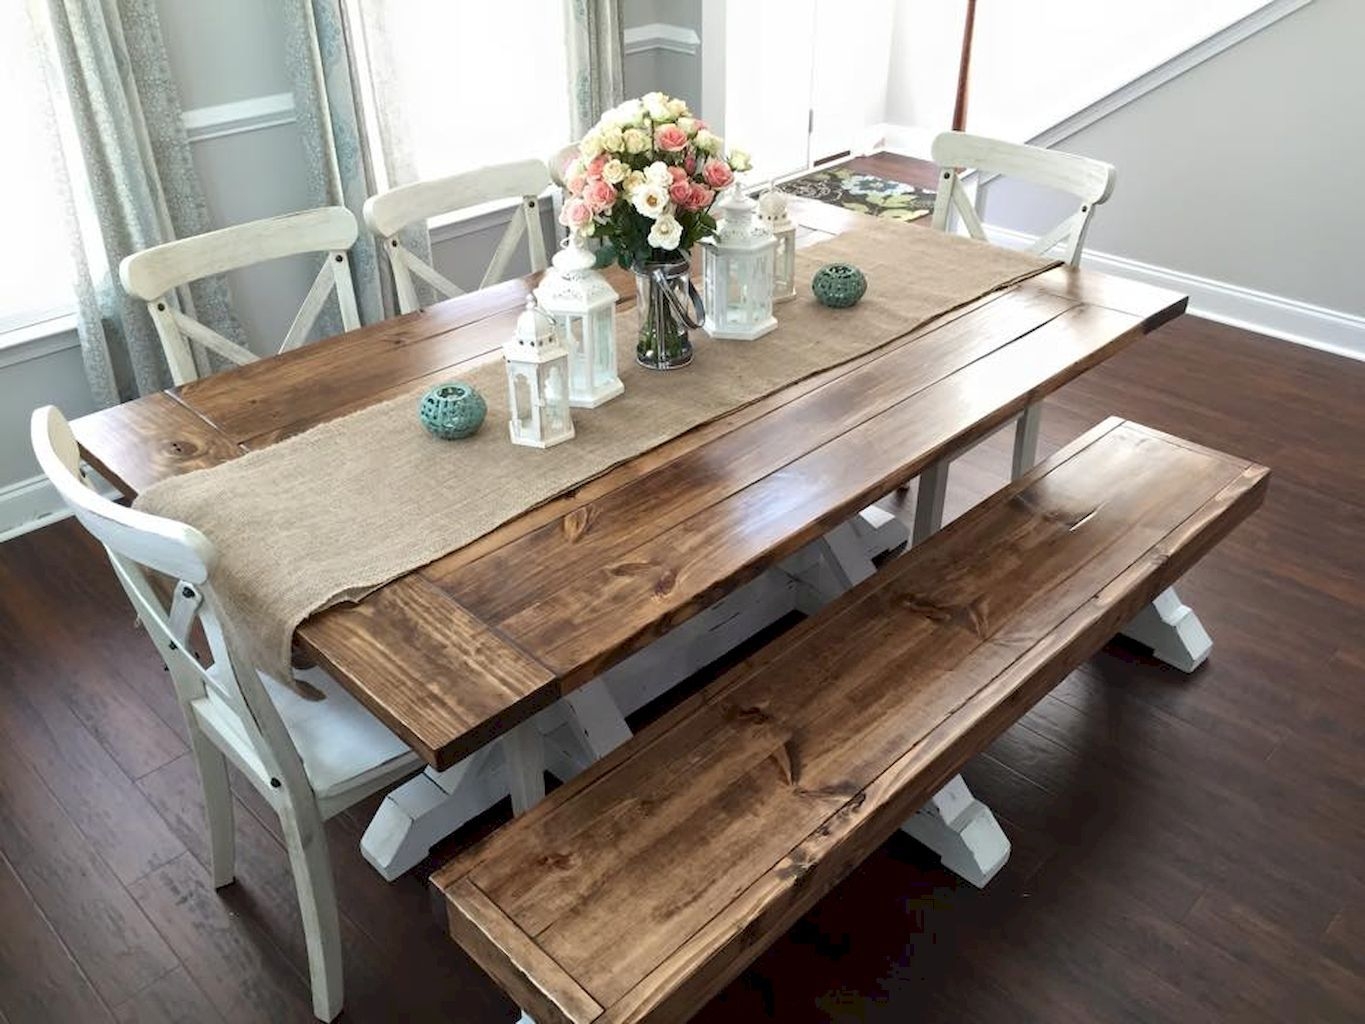 Dining Table With Bench   VisualHunt